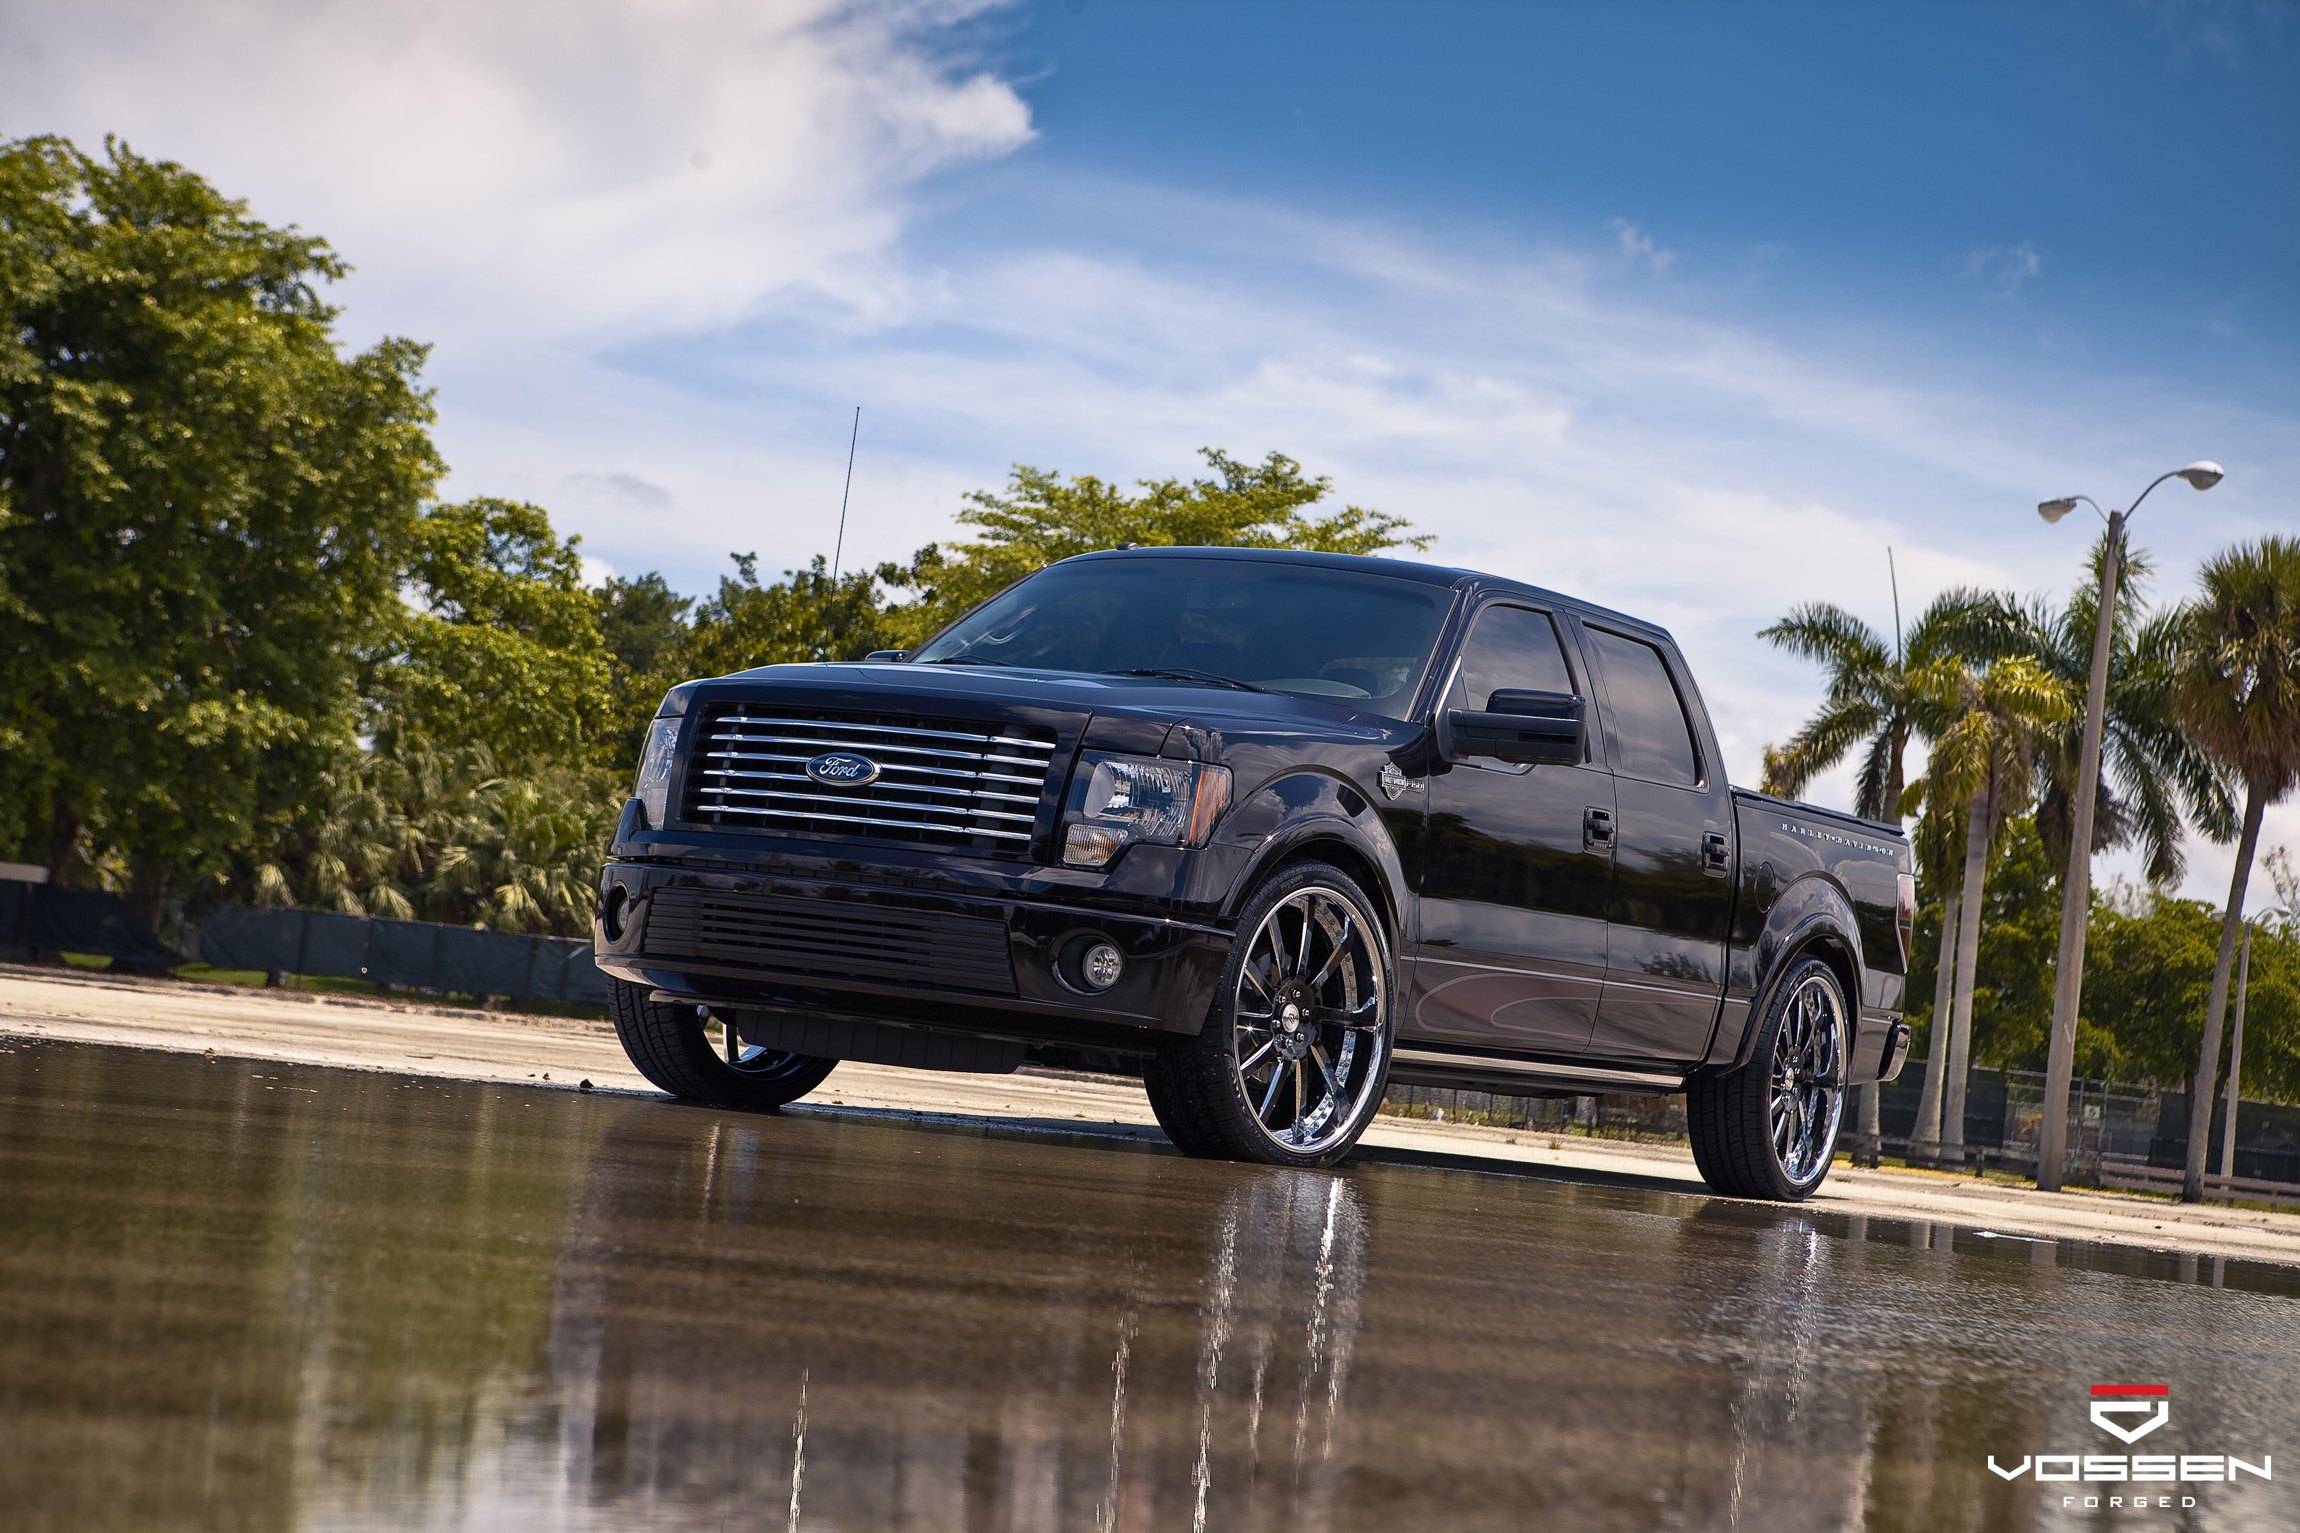 Black Ford F-150 with Chrome Billet Grille - Photo by Vossen